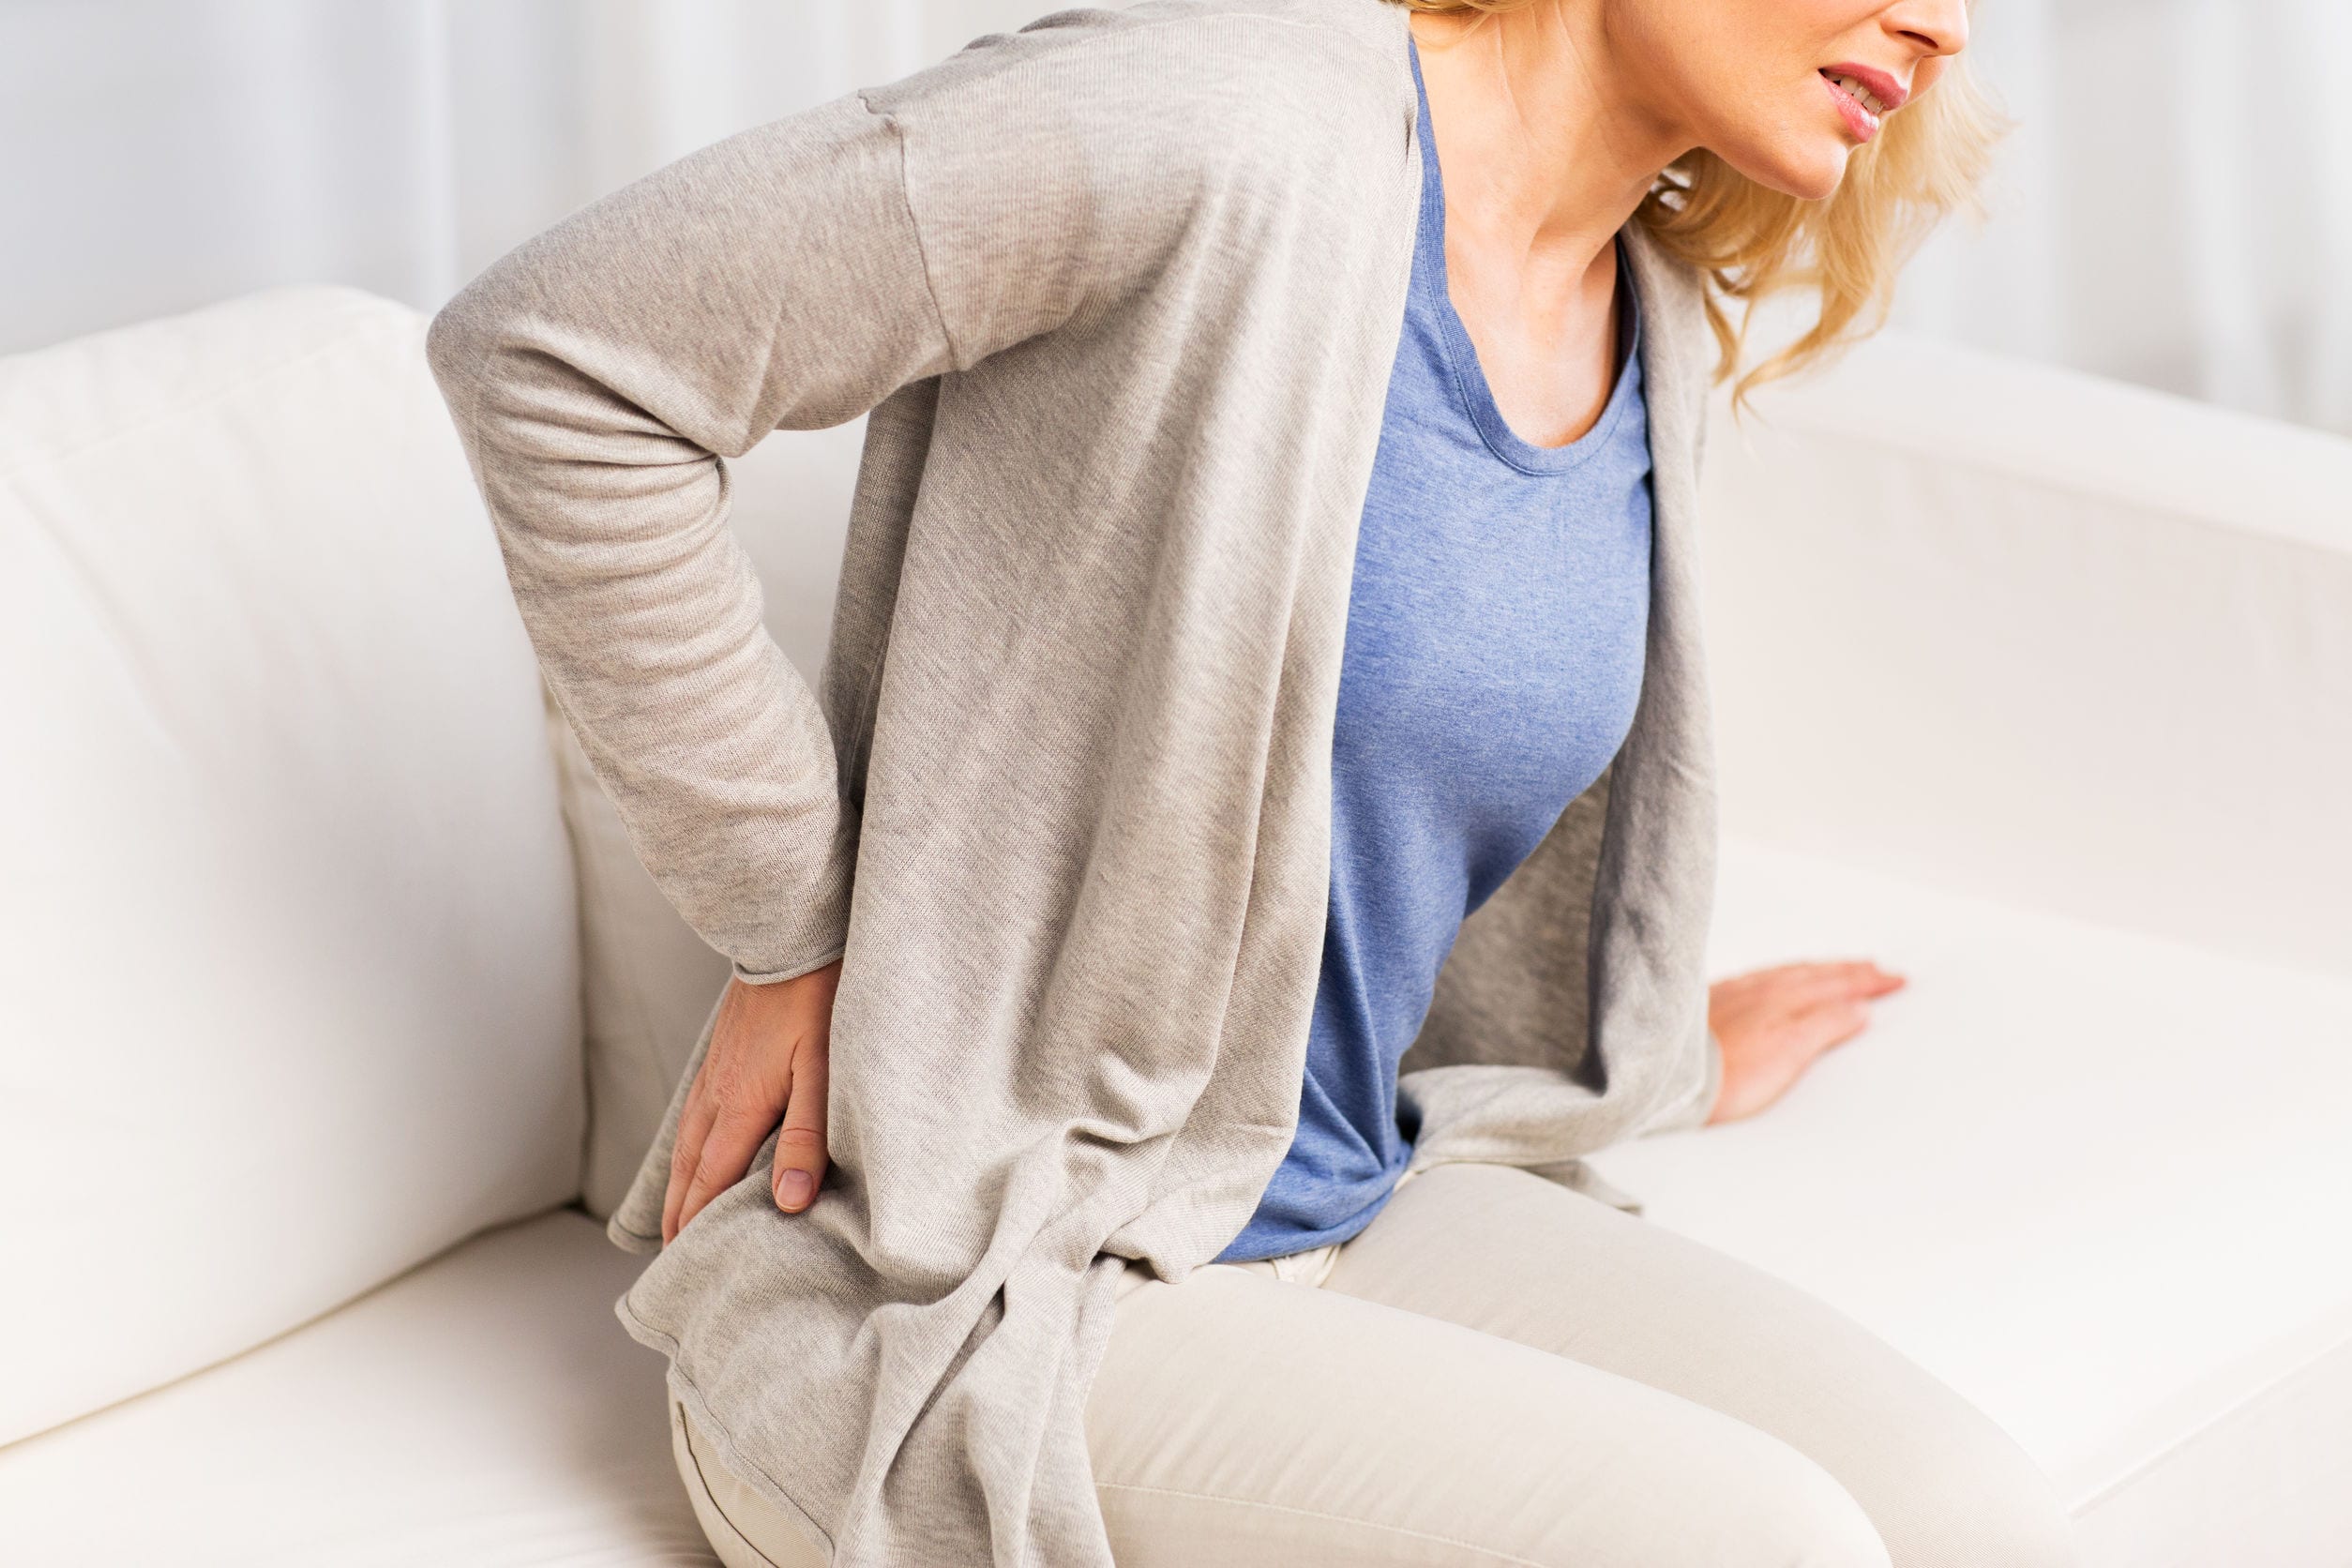 Get Rid of Back Pain with These Helpful Stretches and Exercises